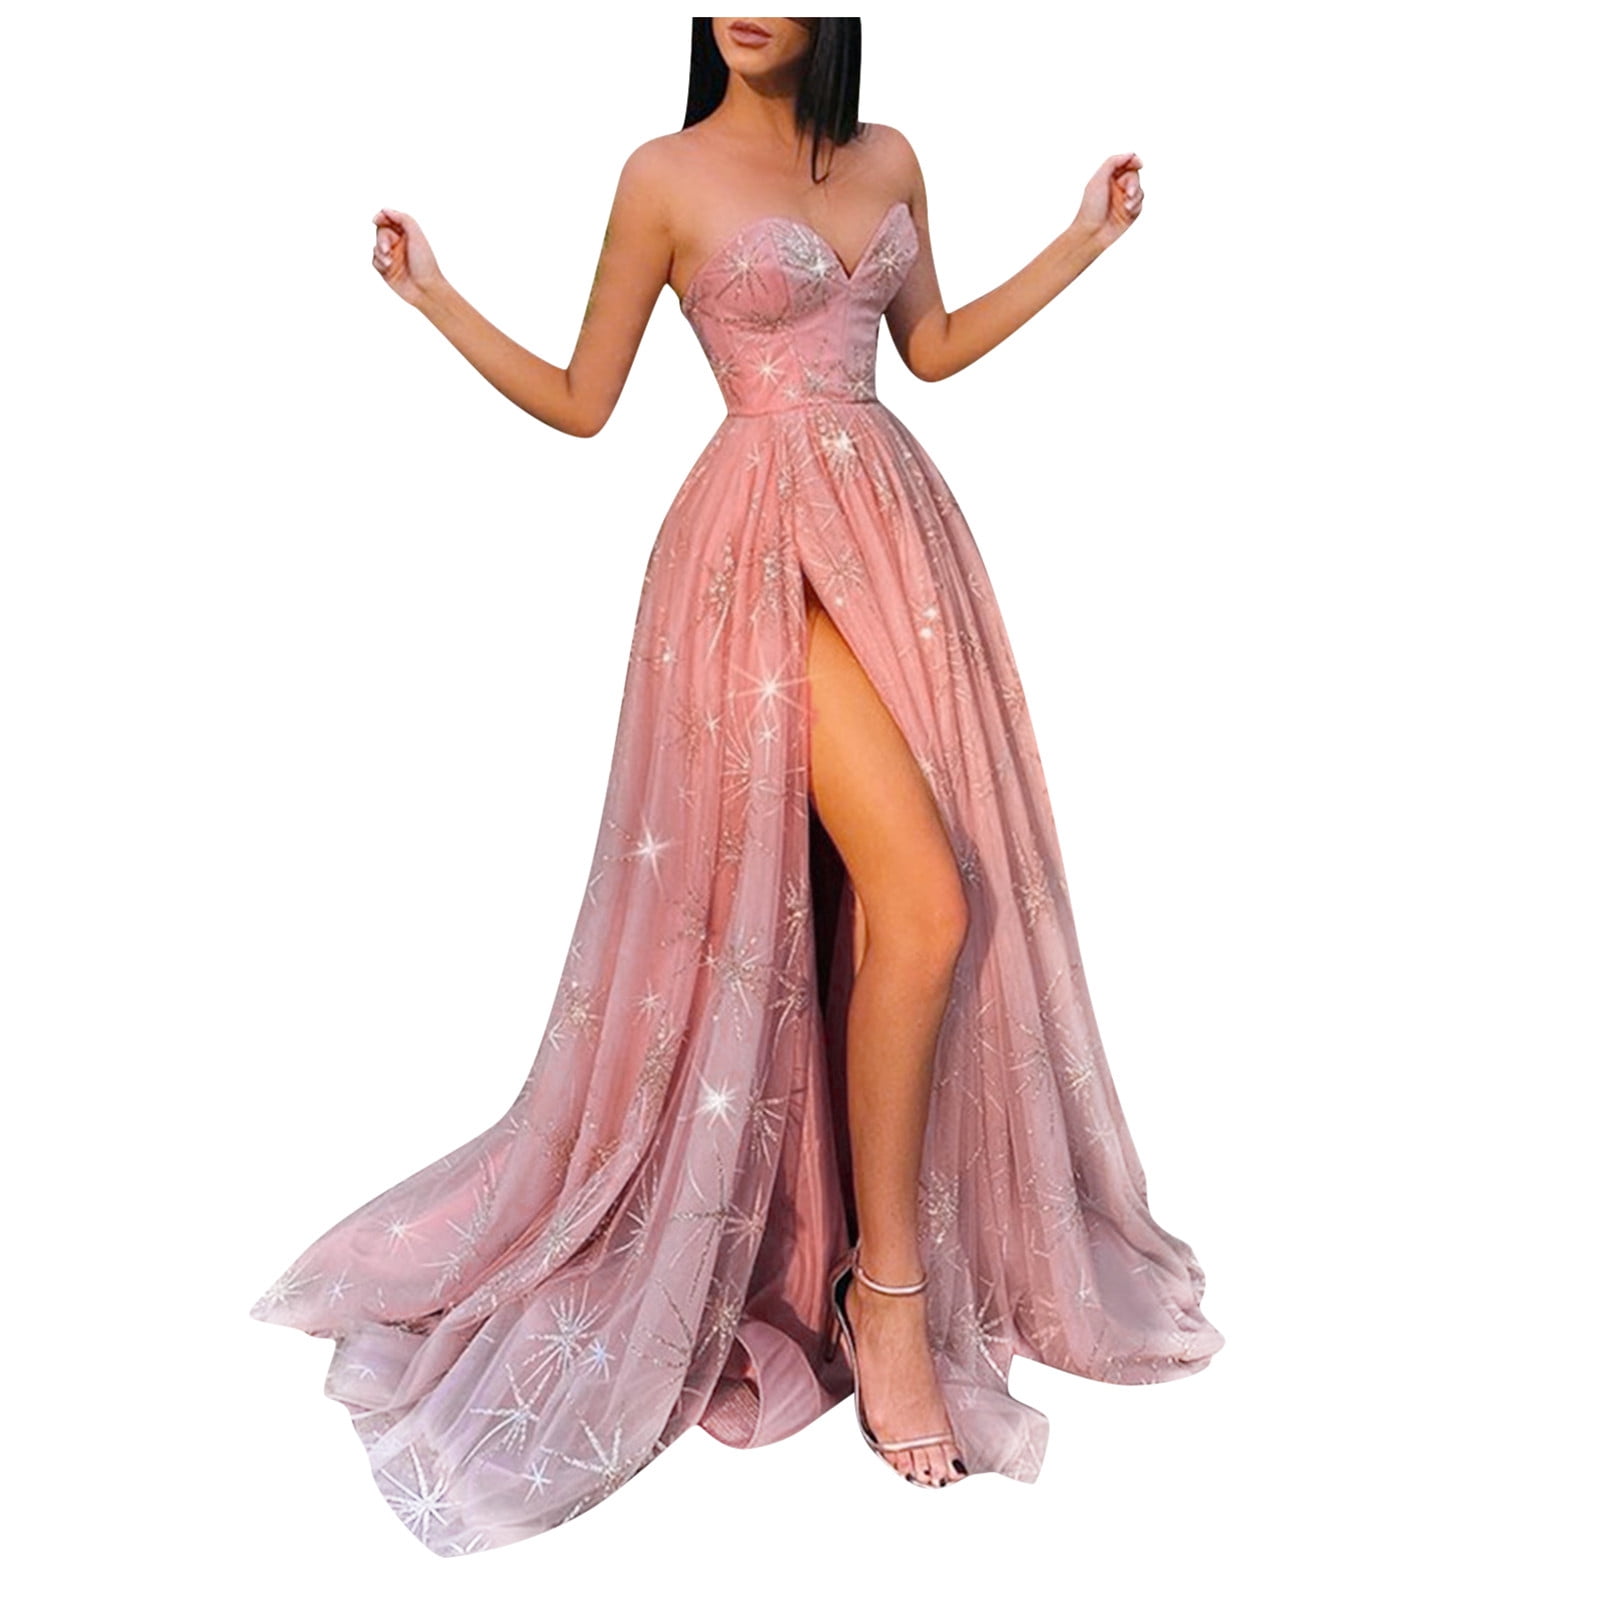 New Formal Long Chiffon Evening Ball Gown Party Prom Bridesmaid Dress Size6-18